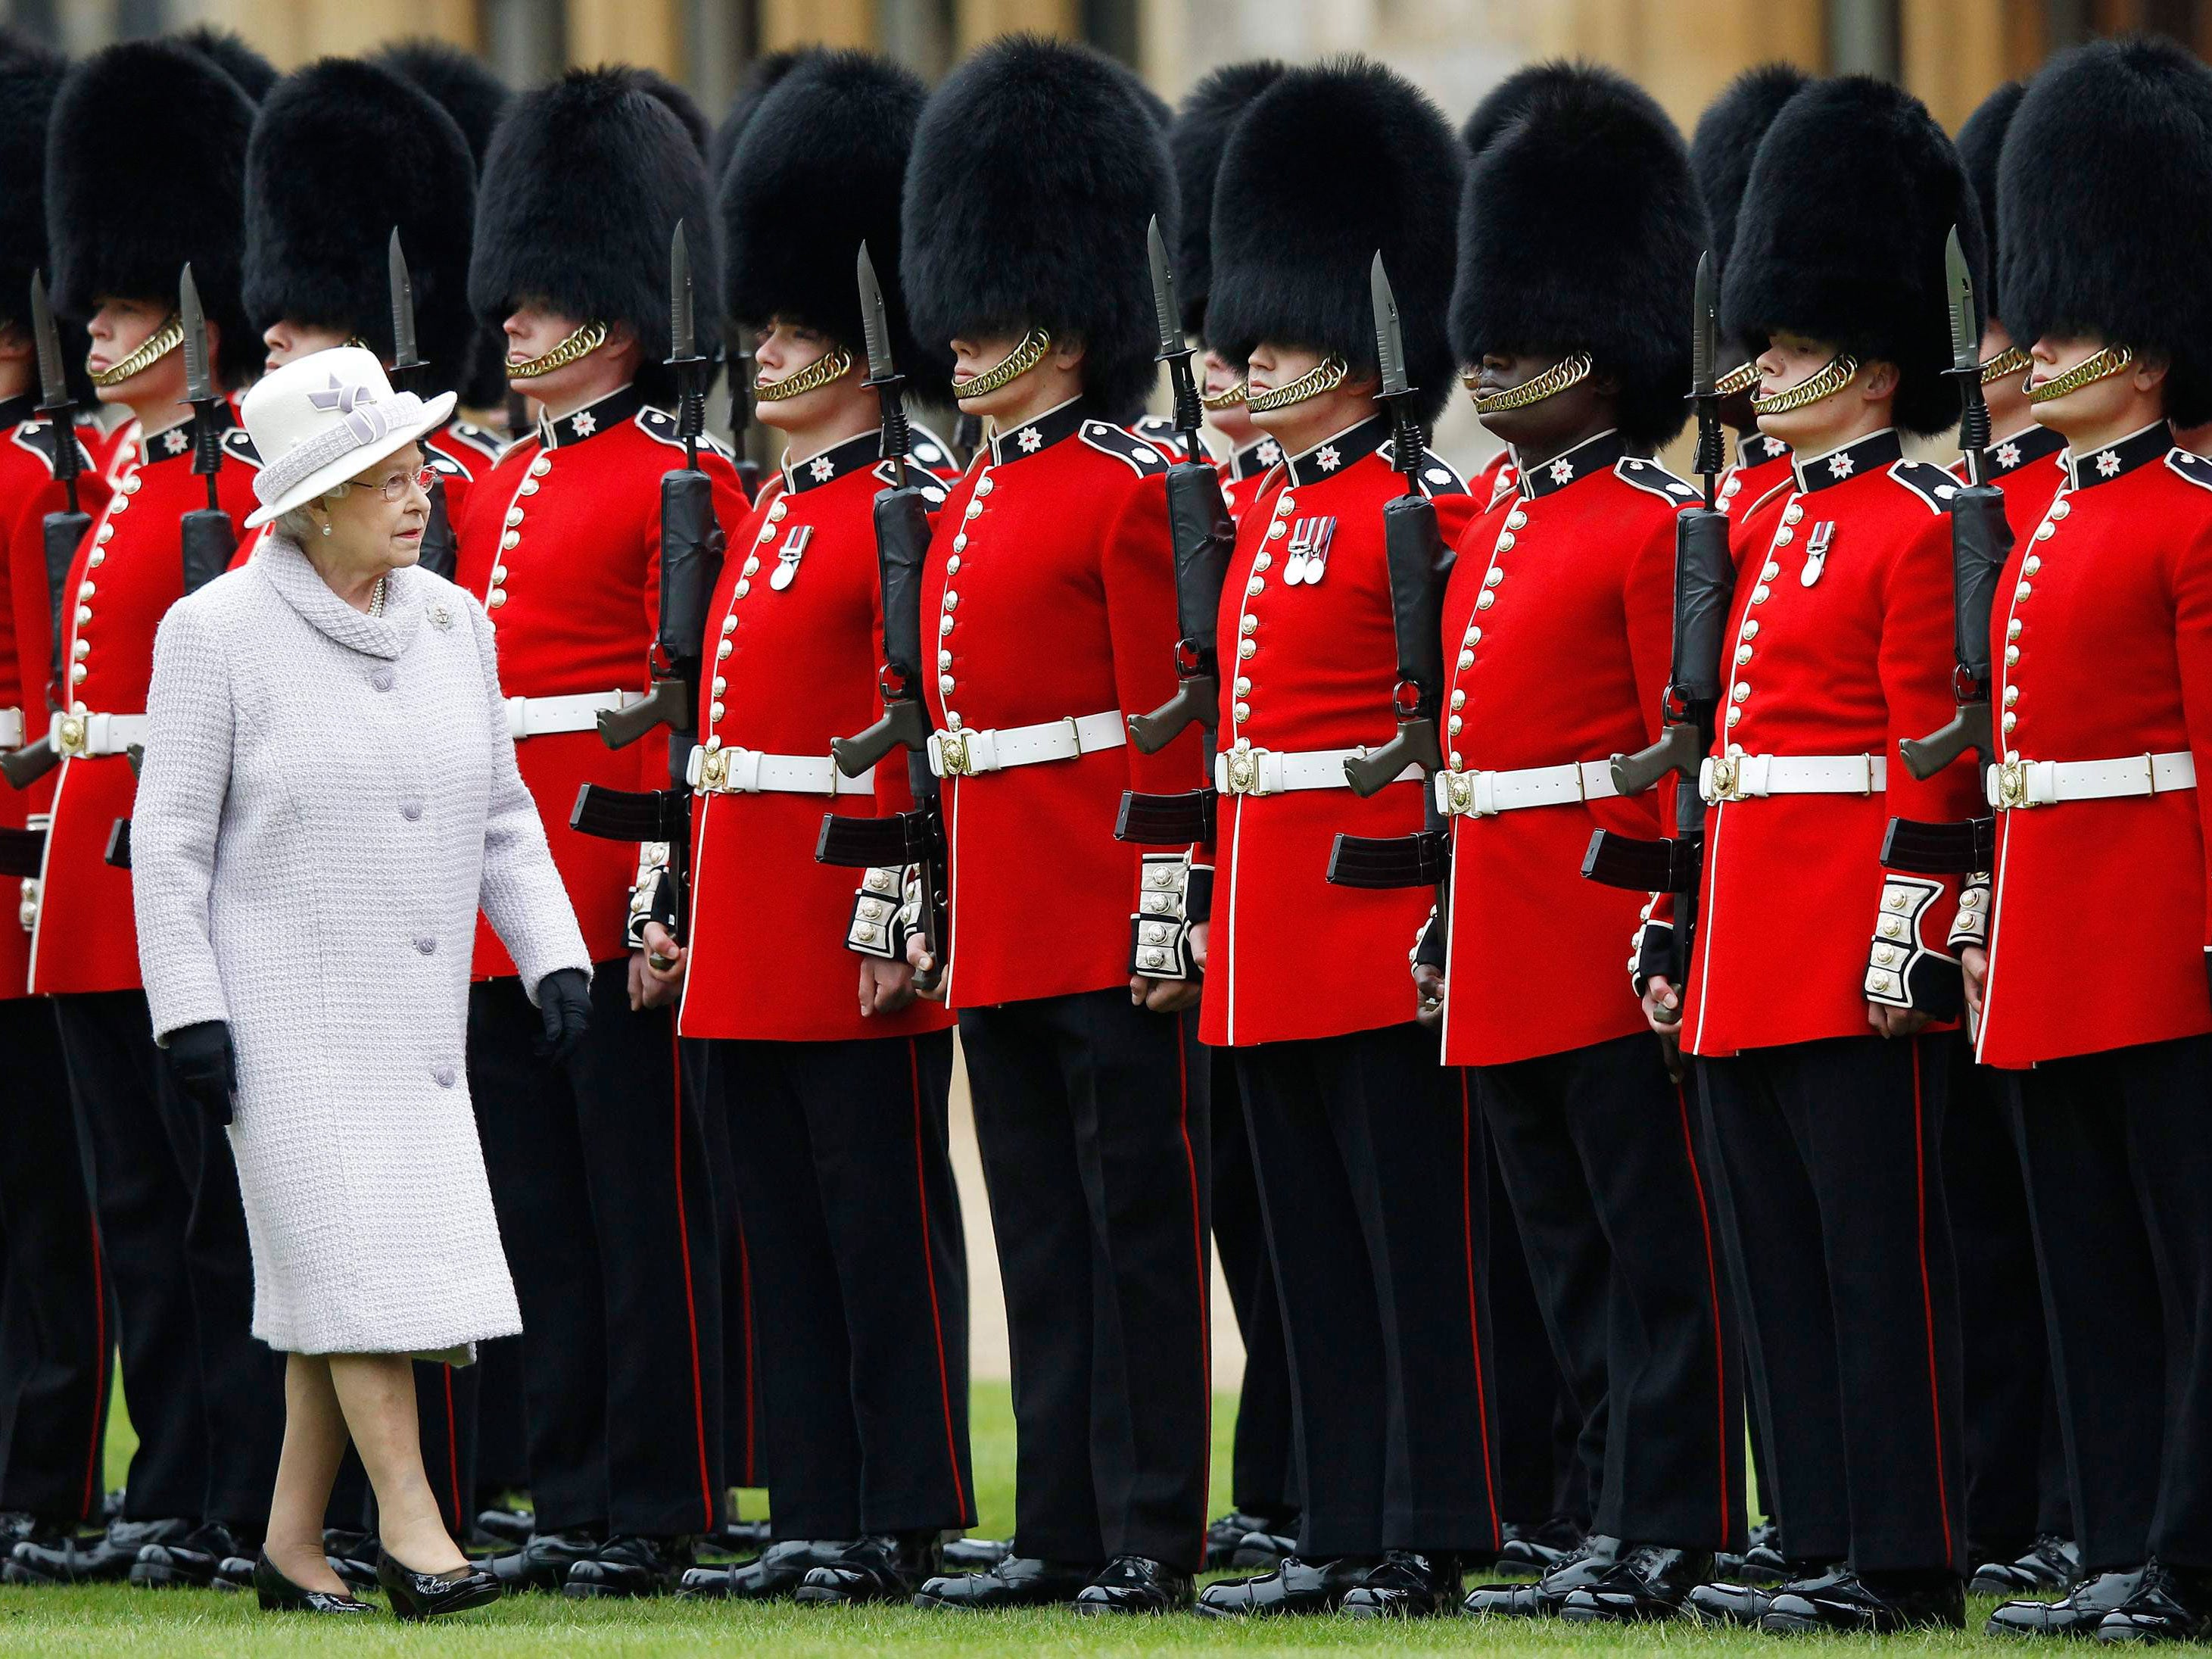 The Trooping of the Colour is an annual celebration marking the Queen's birthday